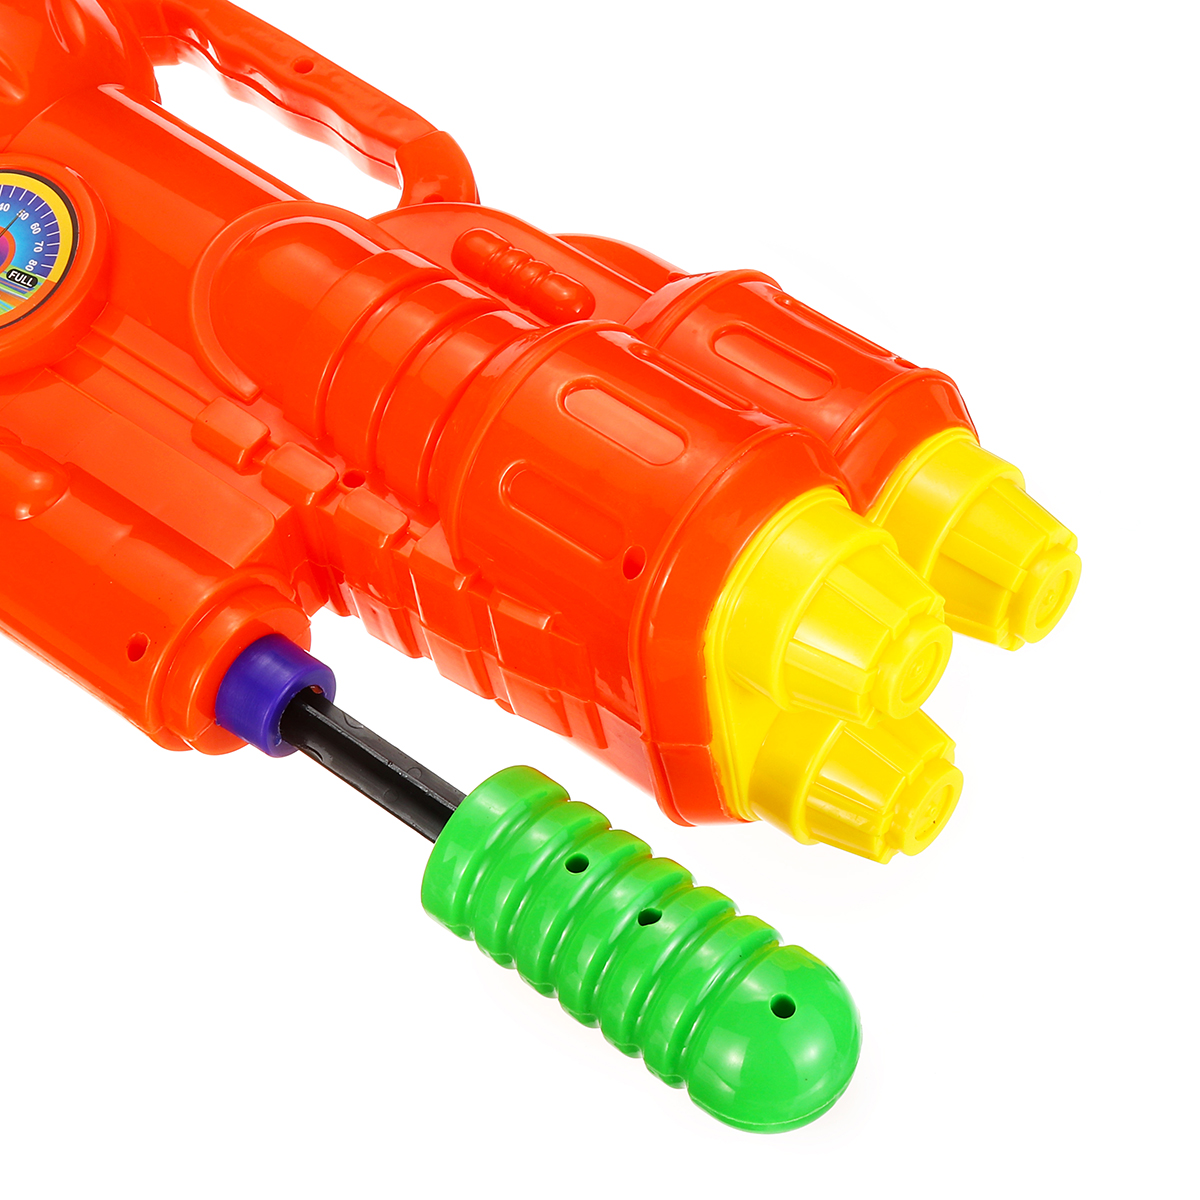 1500ml-Red-Or-Blue-Toy-Water-Sprinkler-With-A-Range-Of-7-9m-Plastic-Water-Sprinkler-For-Children-Bea-1703042-10